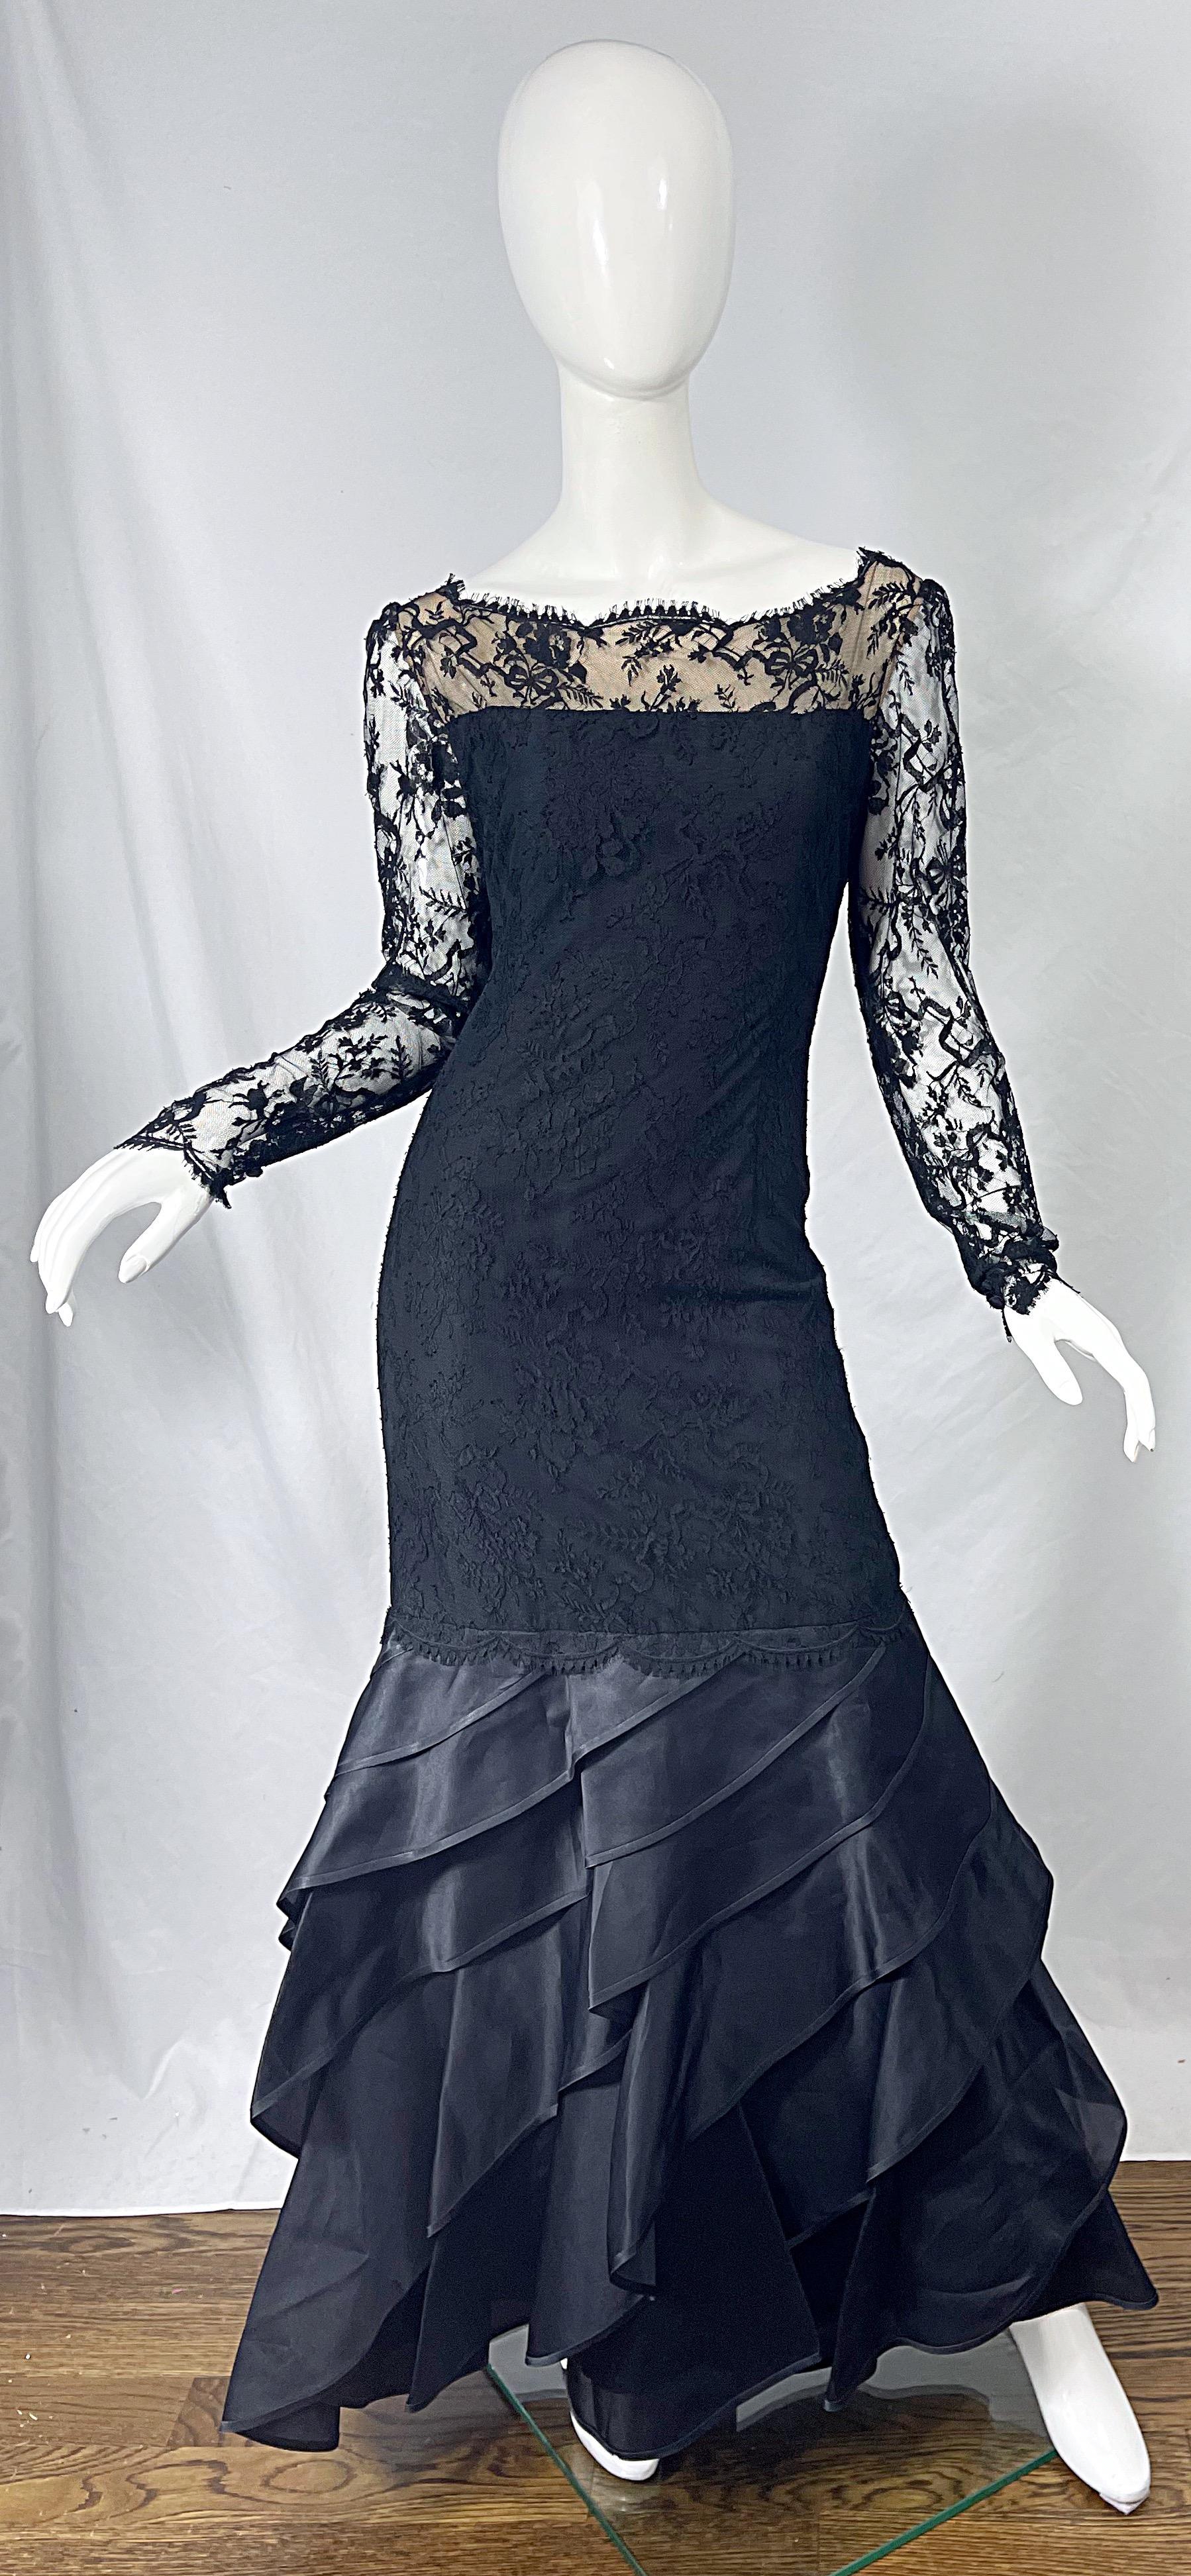 Beautiful vintage 90s BILL BLASS black chantilly lace, silk and satin long sleeve evening gown ! Features nude chiffon under the bodice. Sheer lace sleeves. Hidden zipper up the back with hook-and-eye closure. Buttons at each sleeve cuff. The bottom